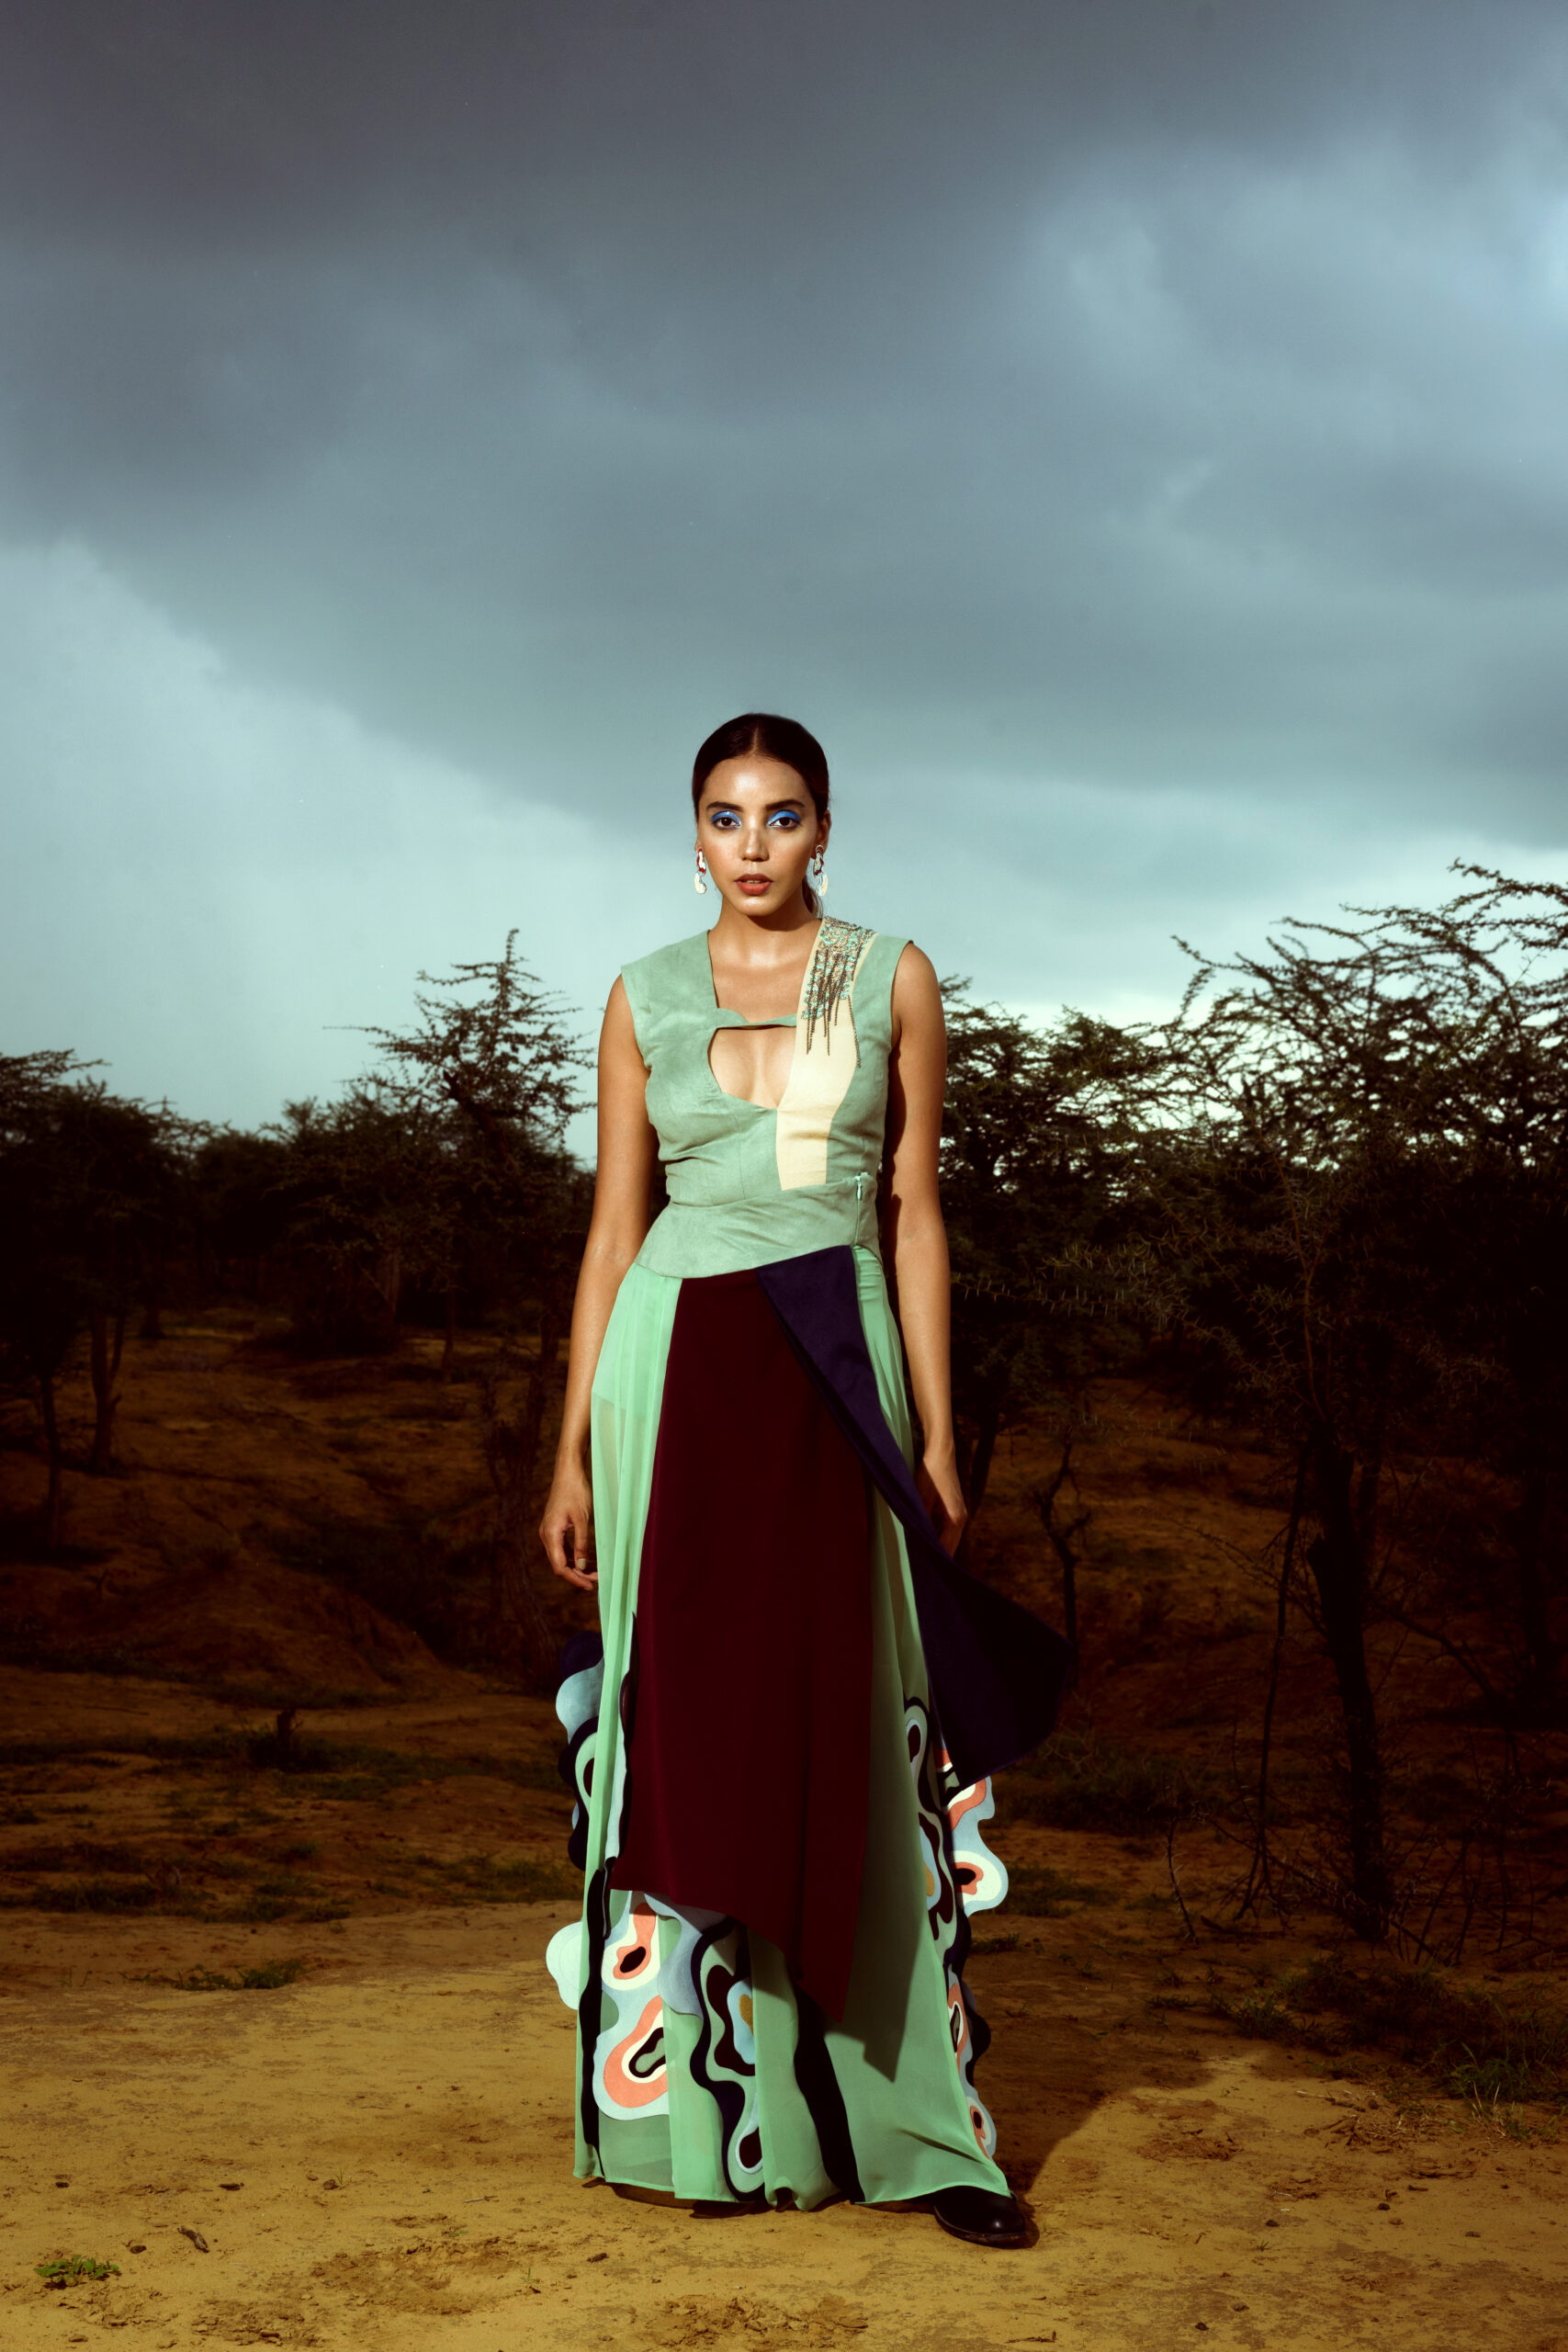 Folded Waves Bodysuit & Skirt by Siddhant Agrawal